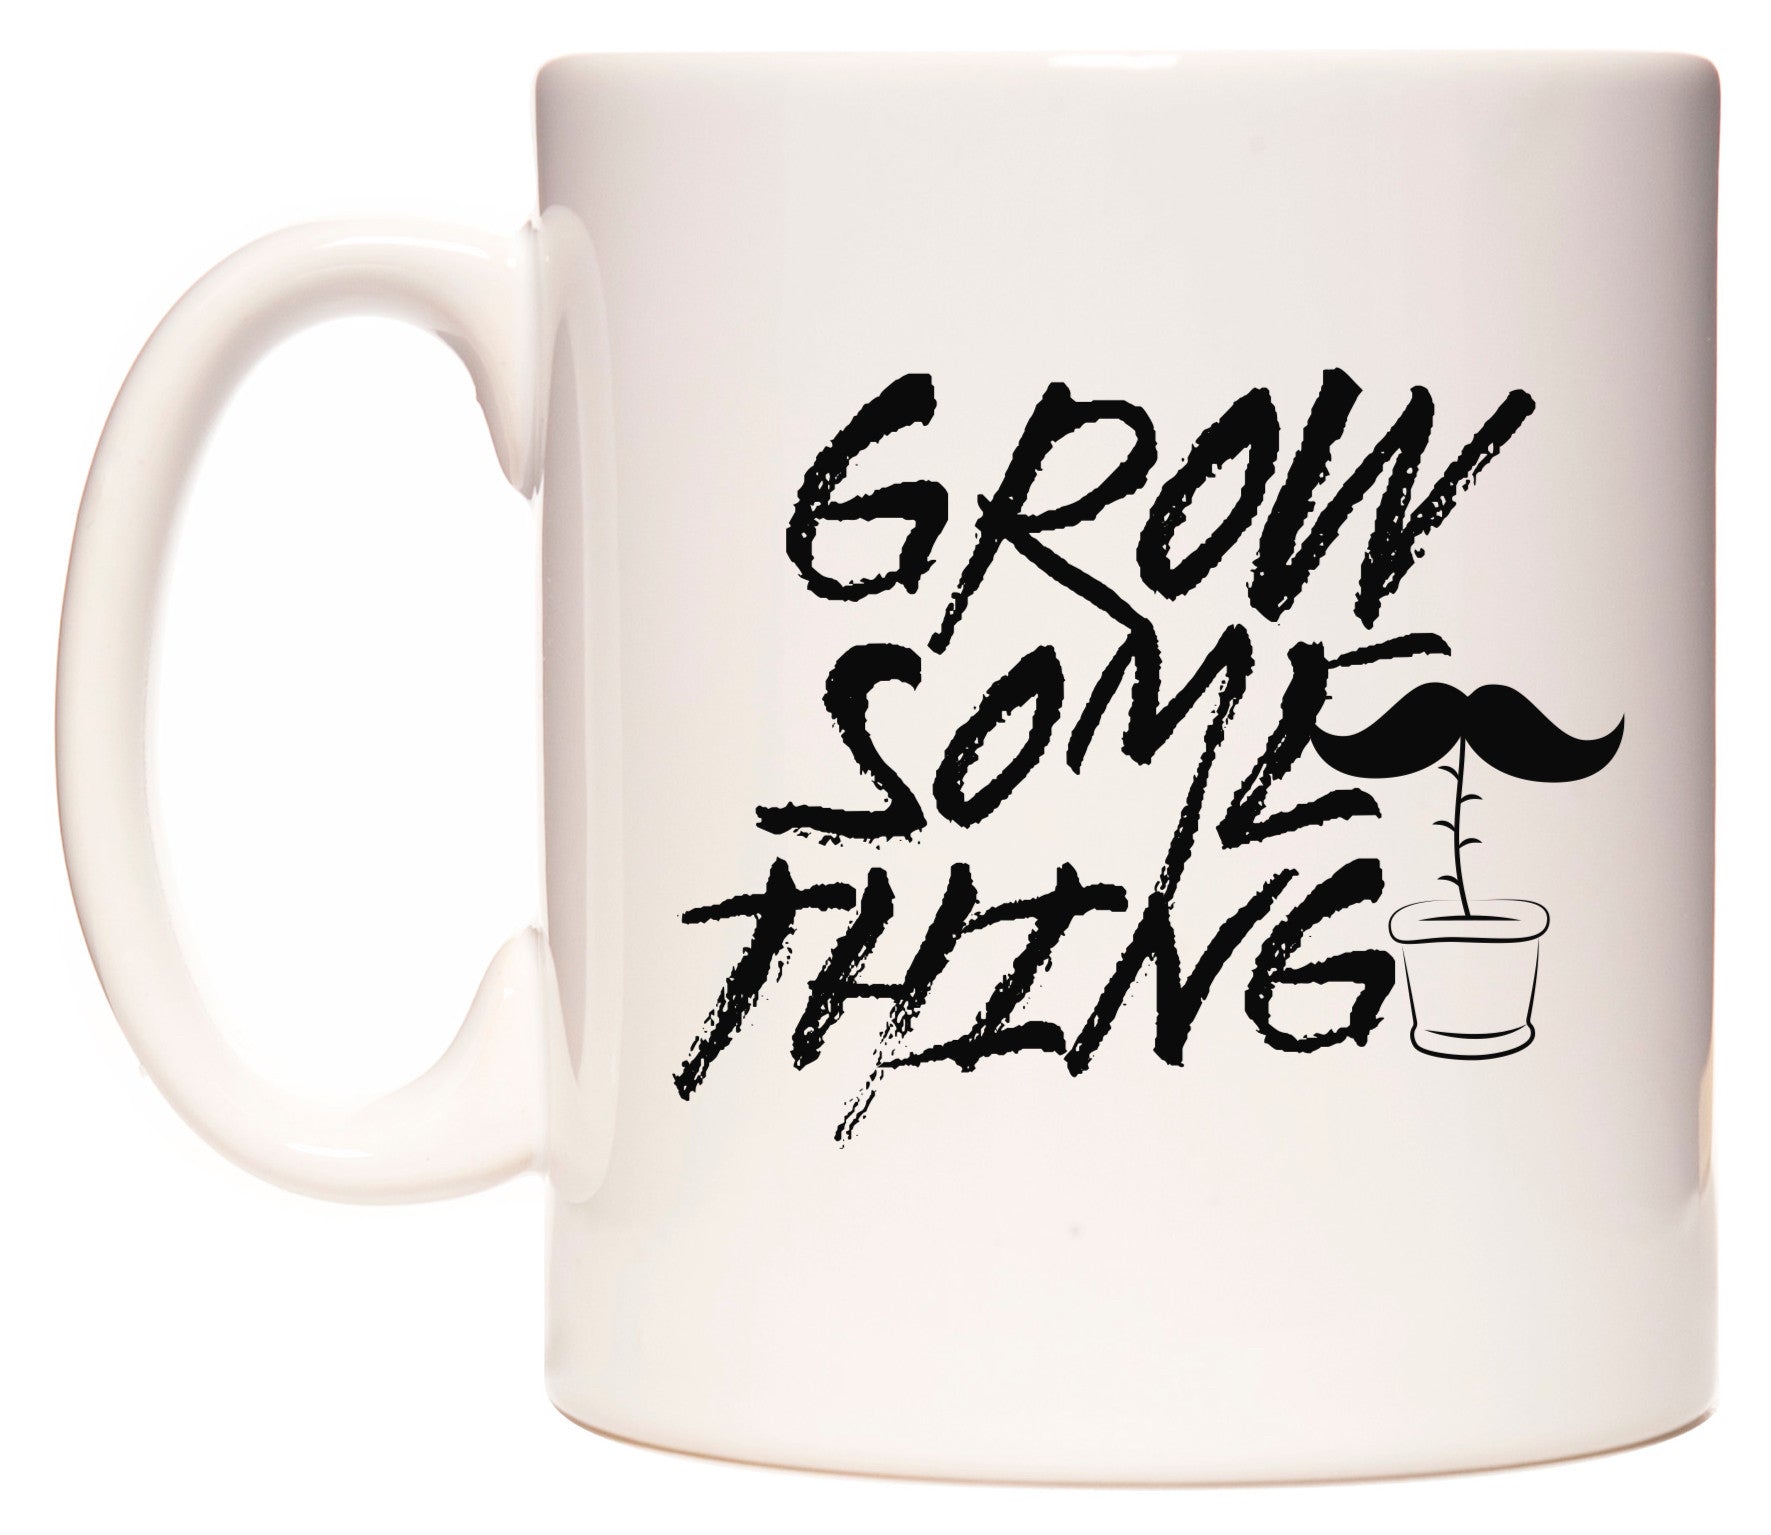 This mug features GROW SOME THING